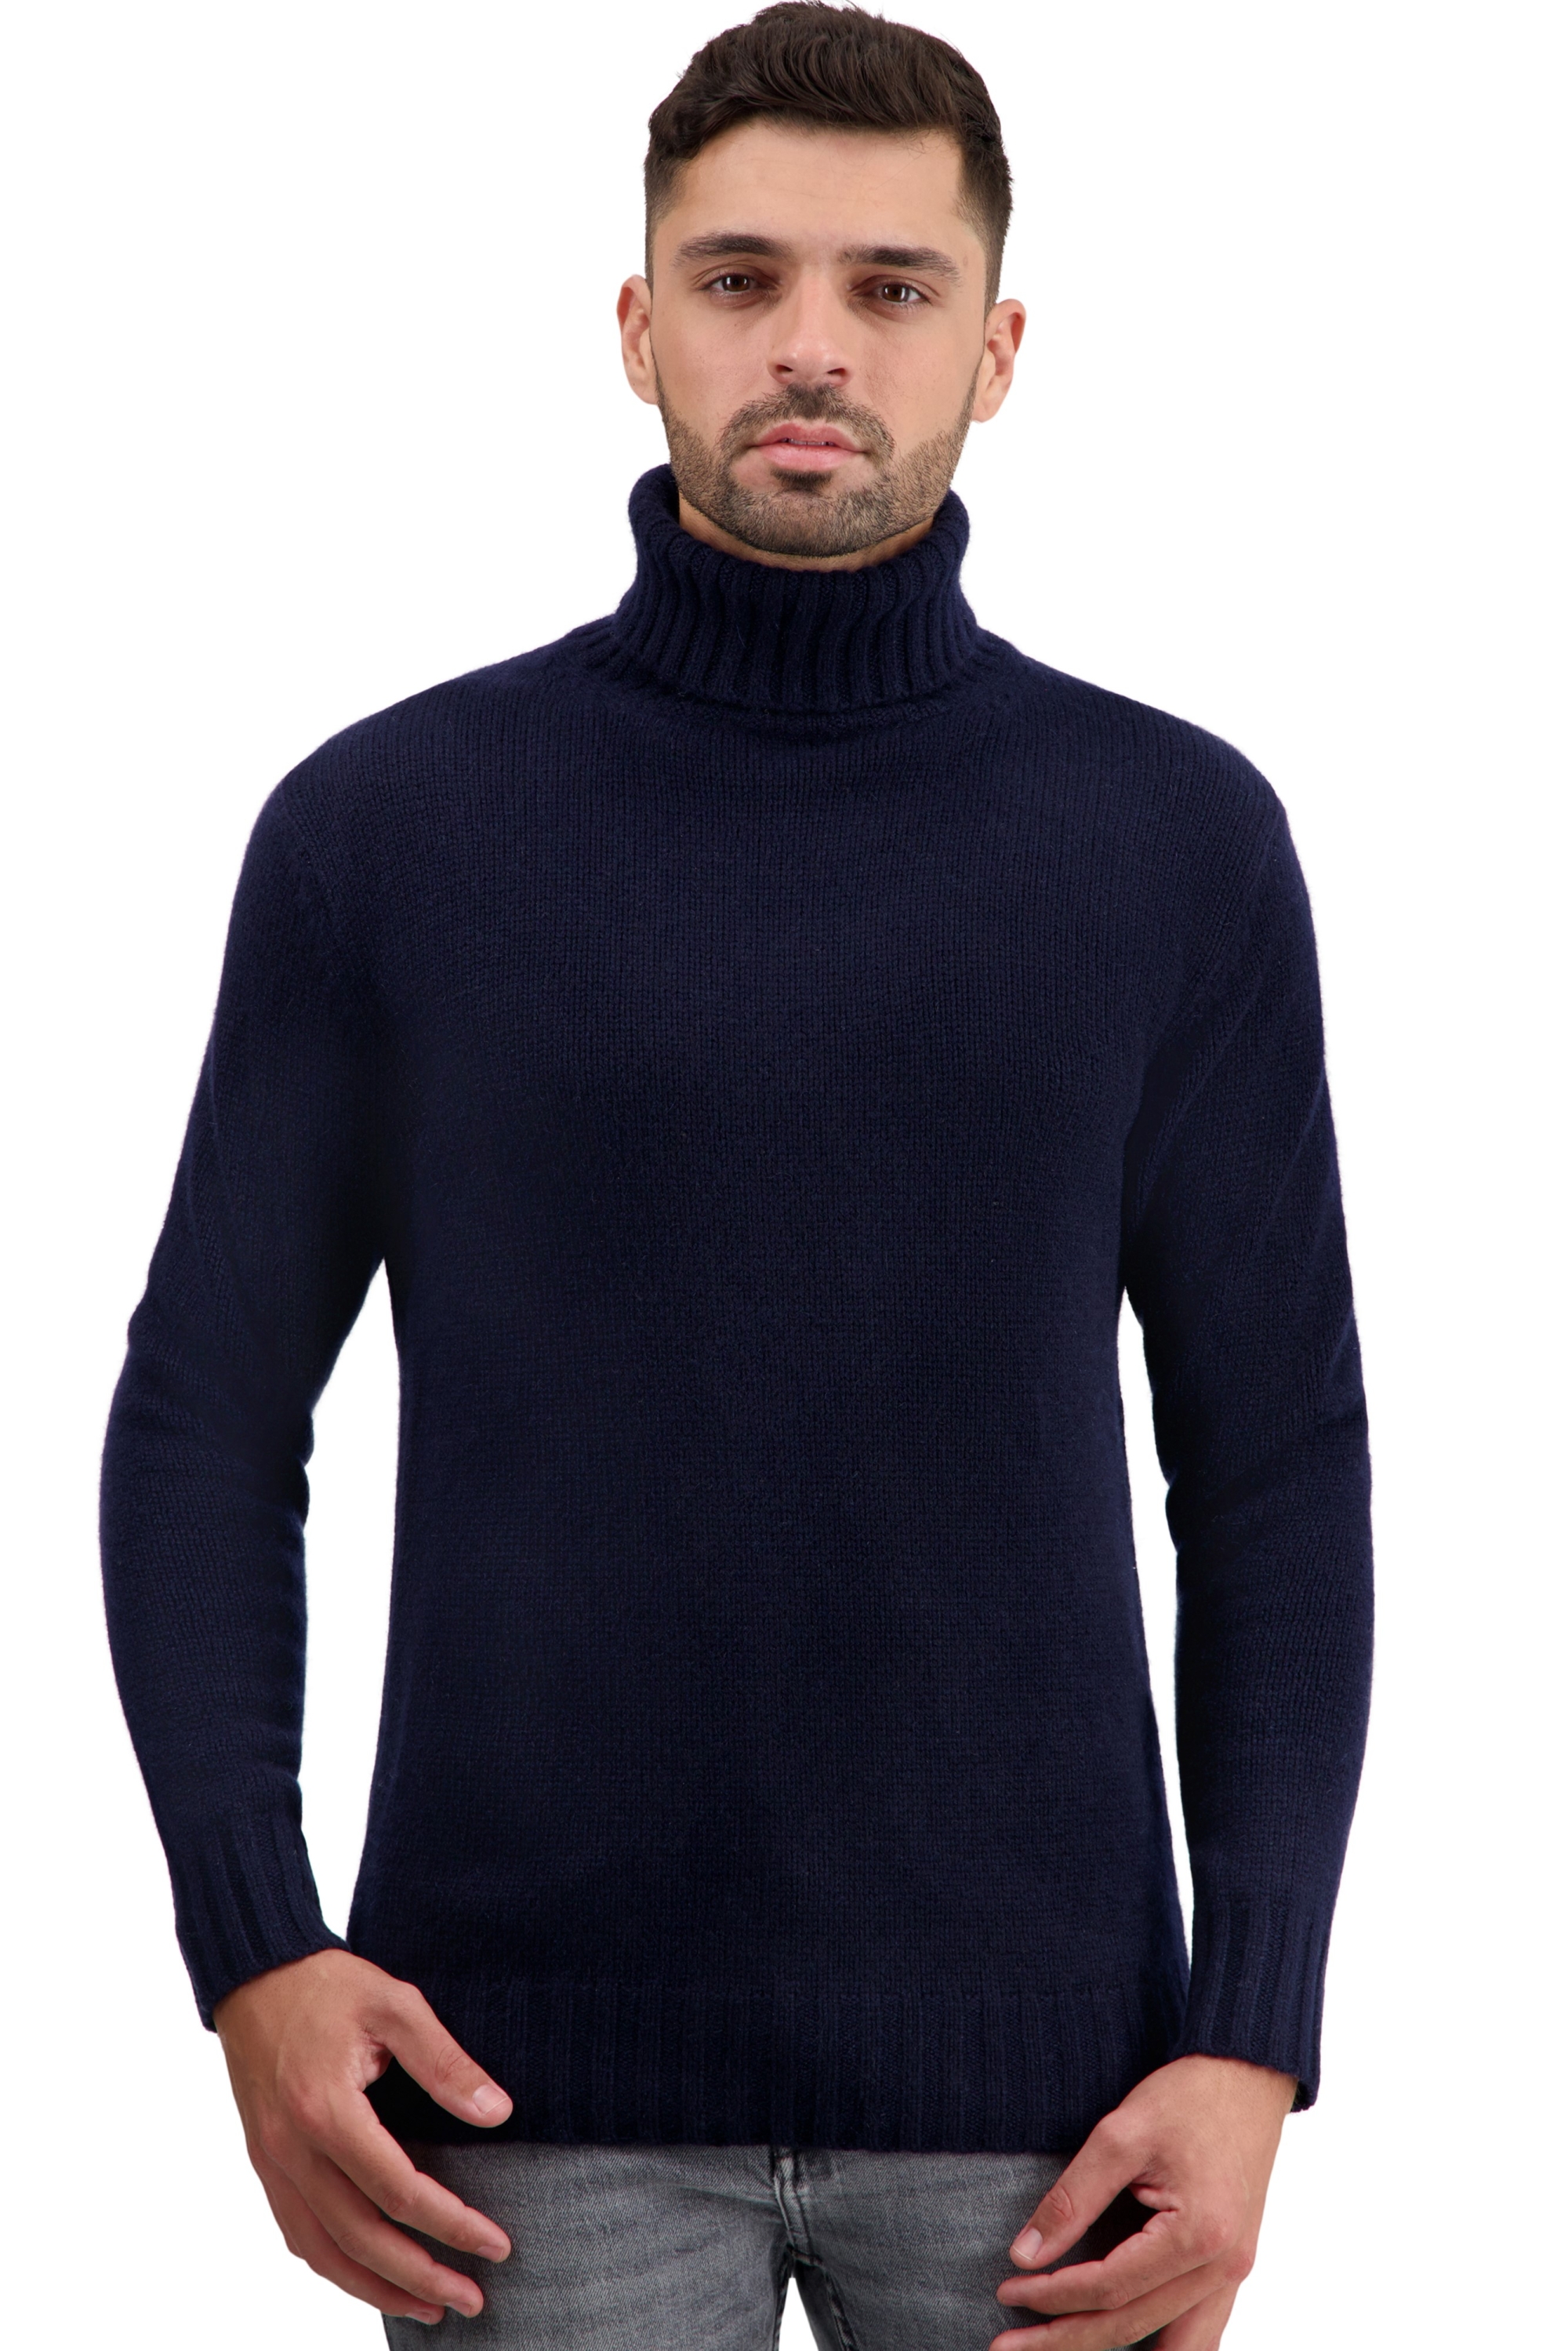 Cashmere men basic sweaters at low prices tobago first dress blue 2xl